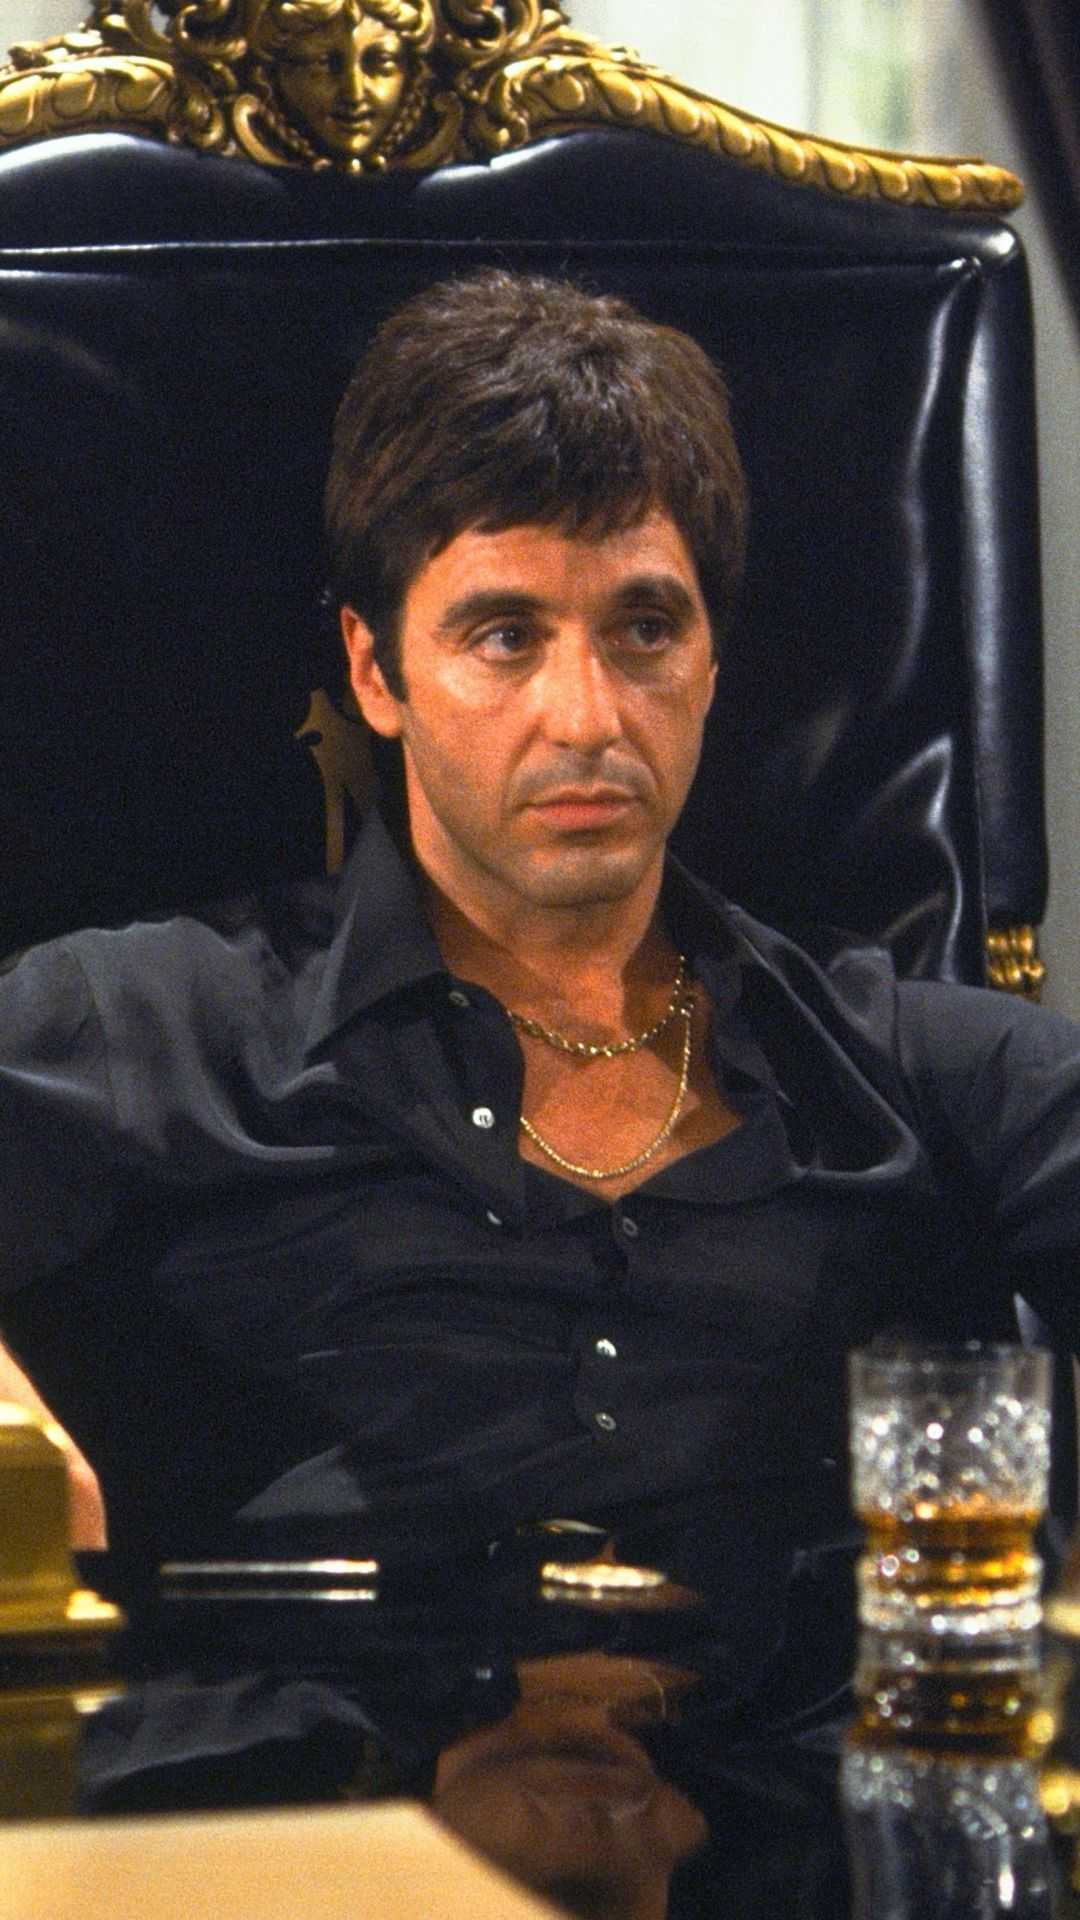 Scarface iPhone Wallpapers  Wallpaper Cave